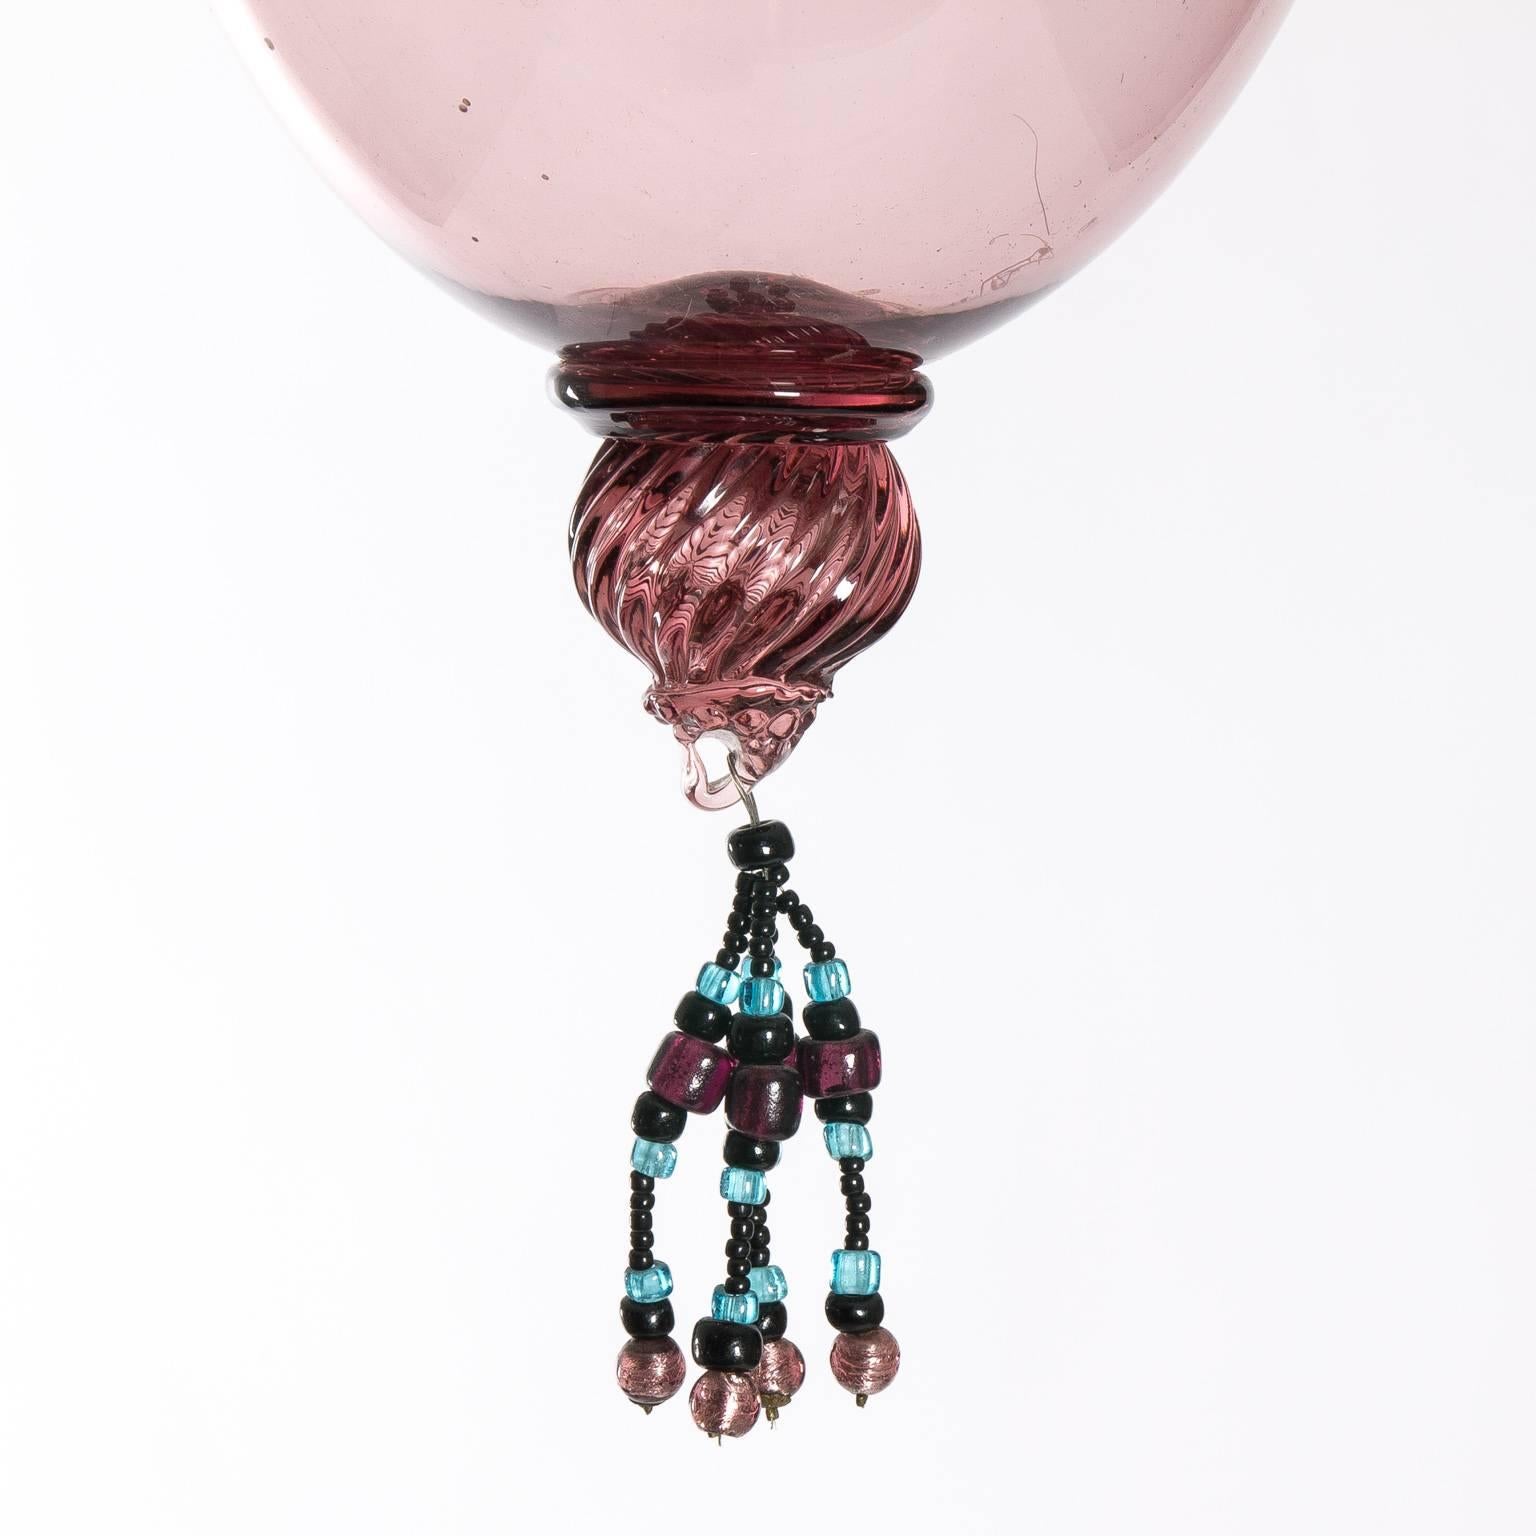 Mid-20th century handblown glass pendants in violet tinted glass with glass bead trim.
 